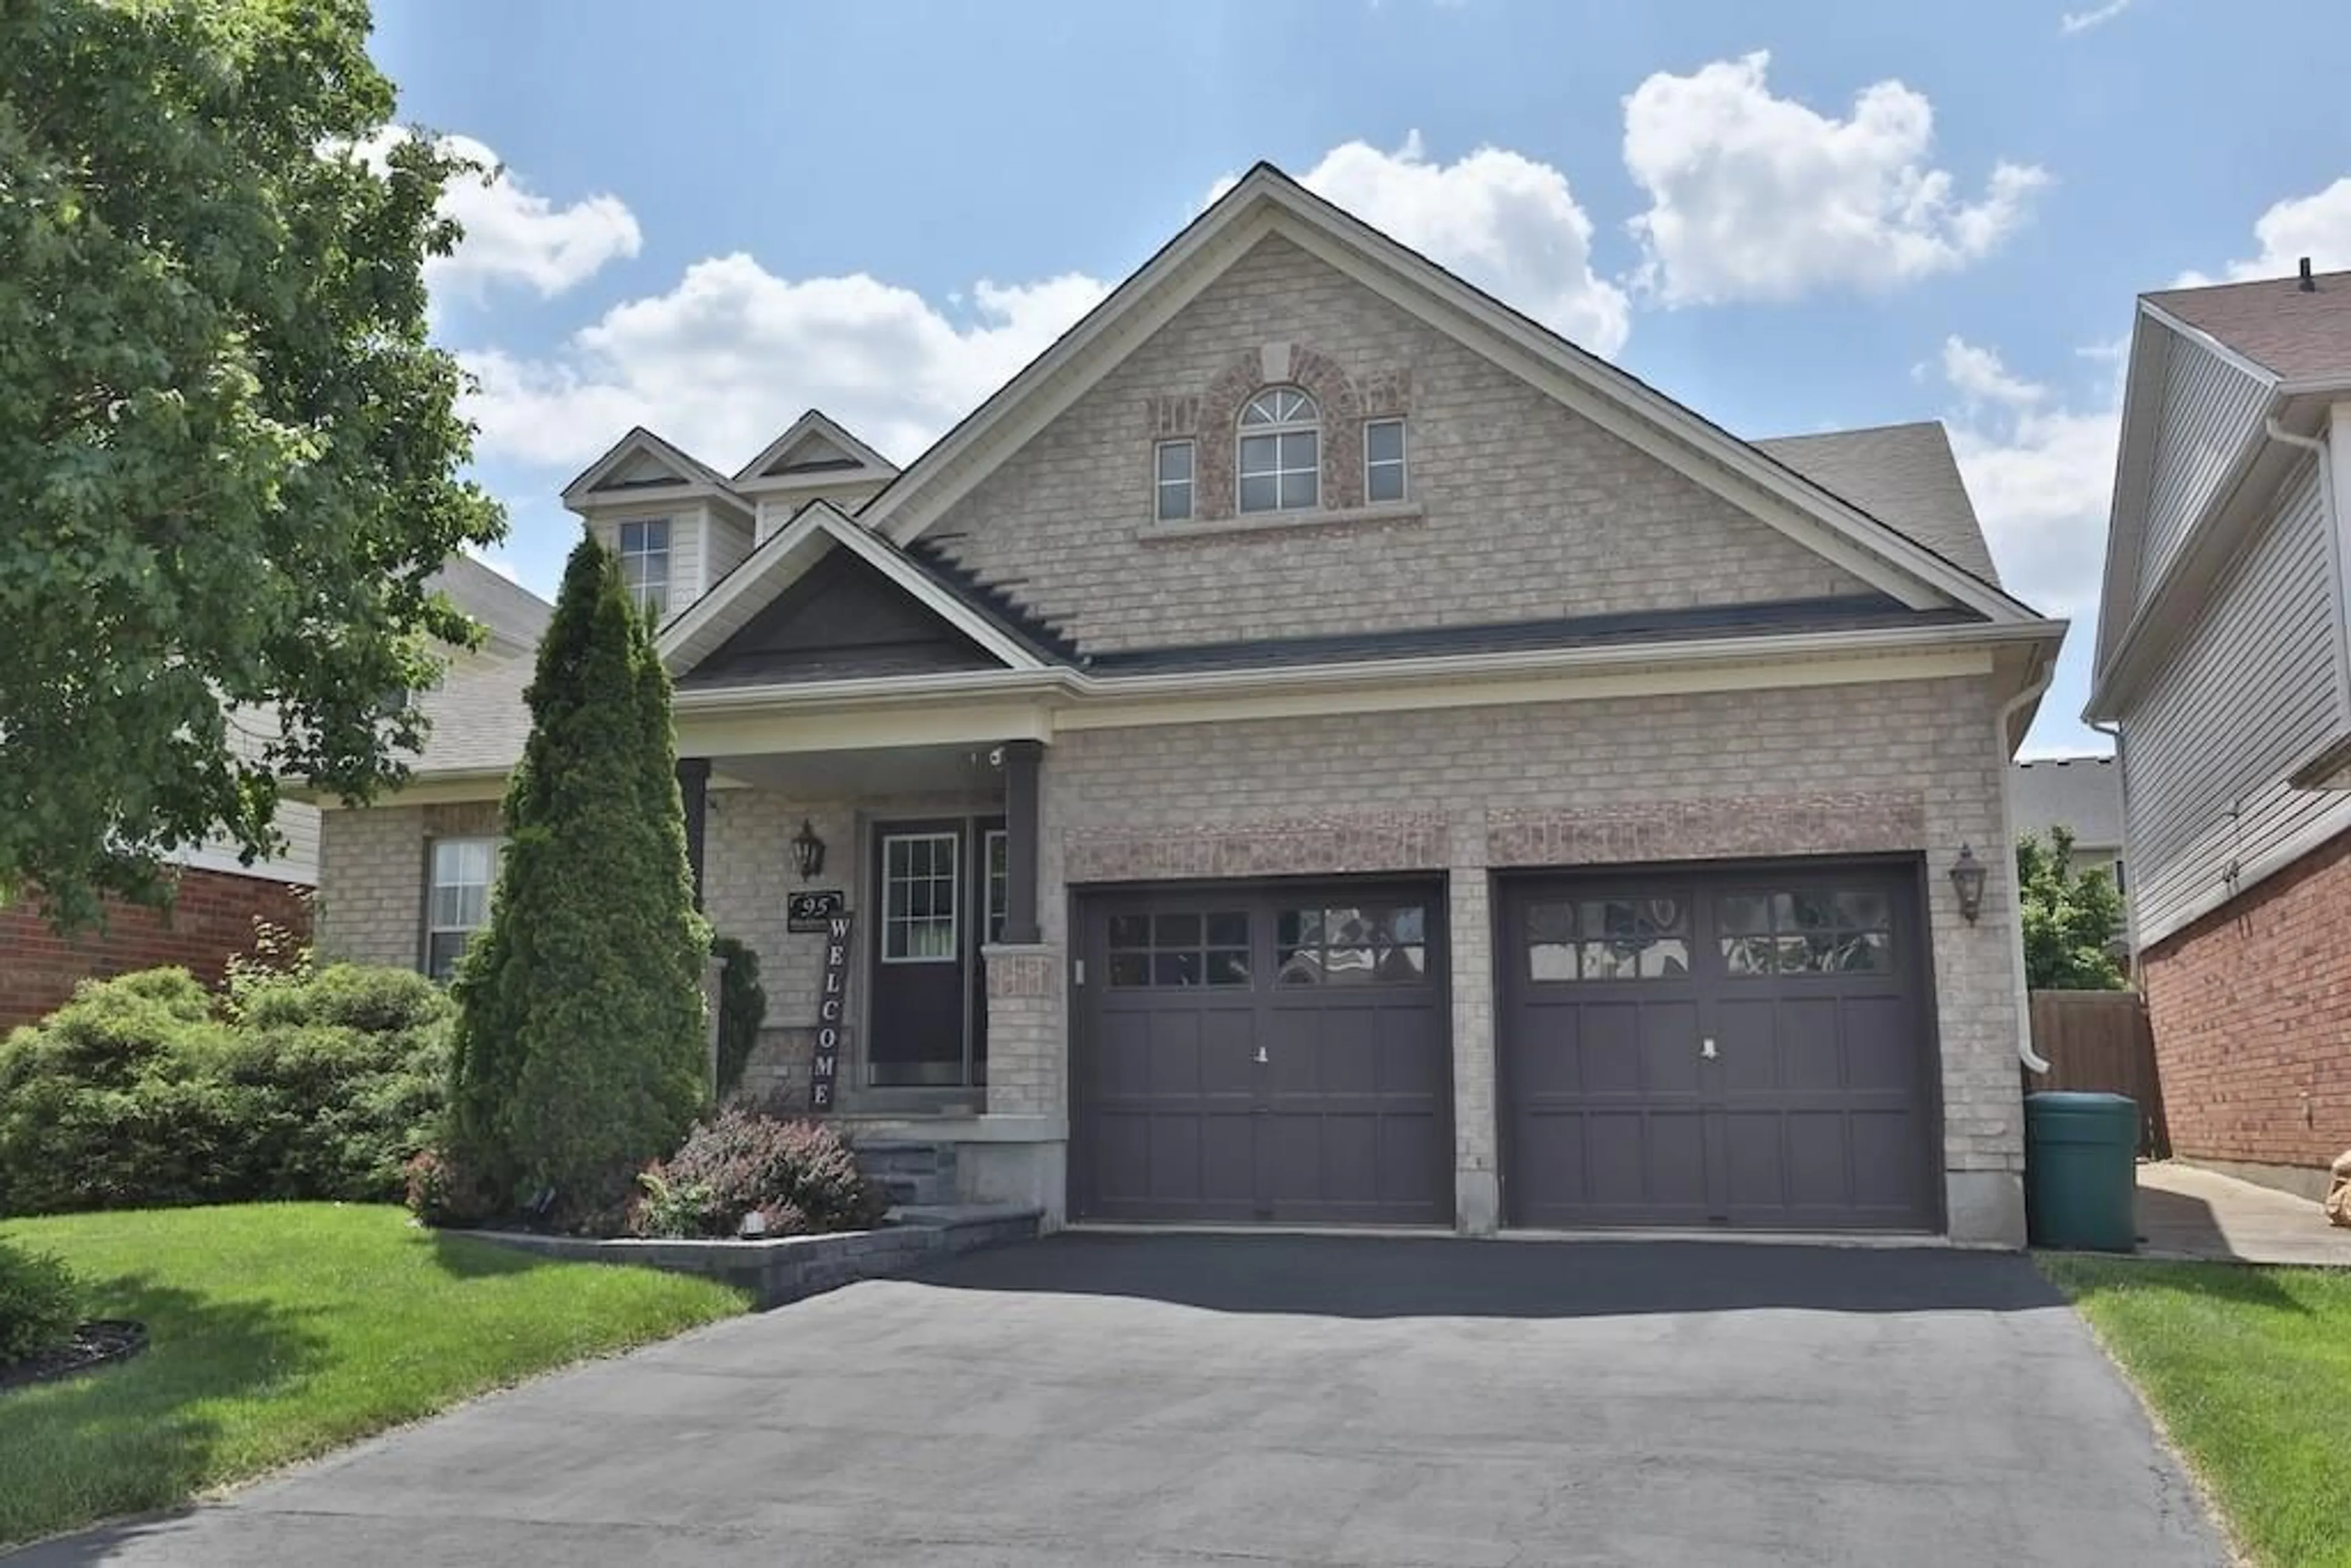 Home with brick exterior material for 95 Blackburn Dr, Brantford Ontario N3T 6R3